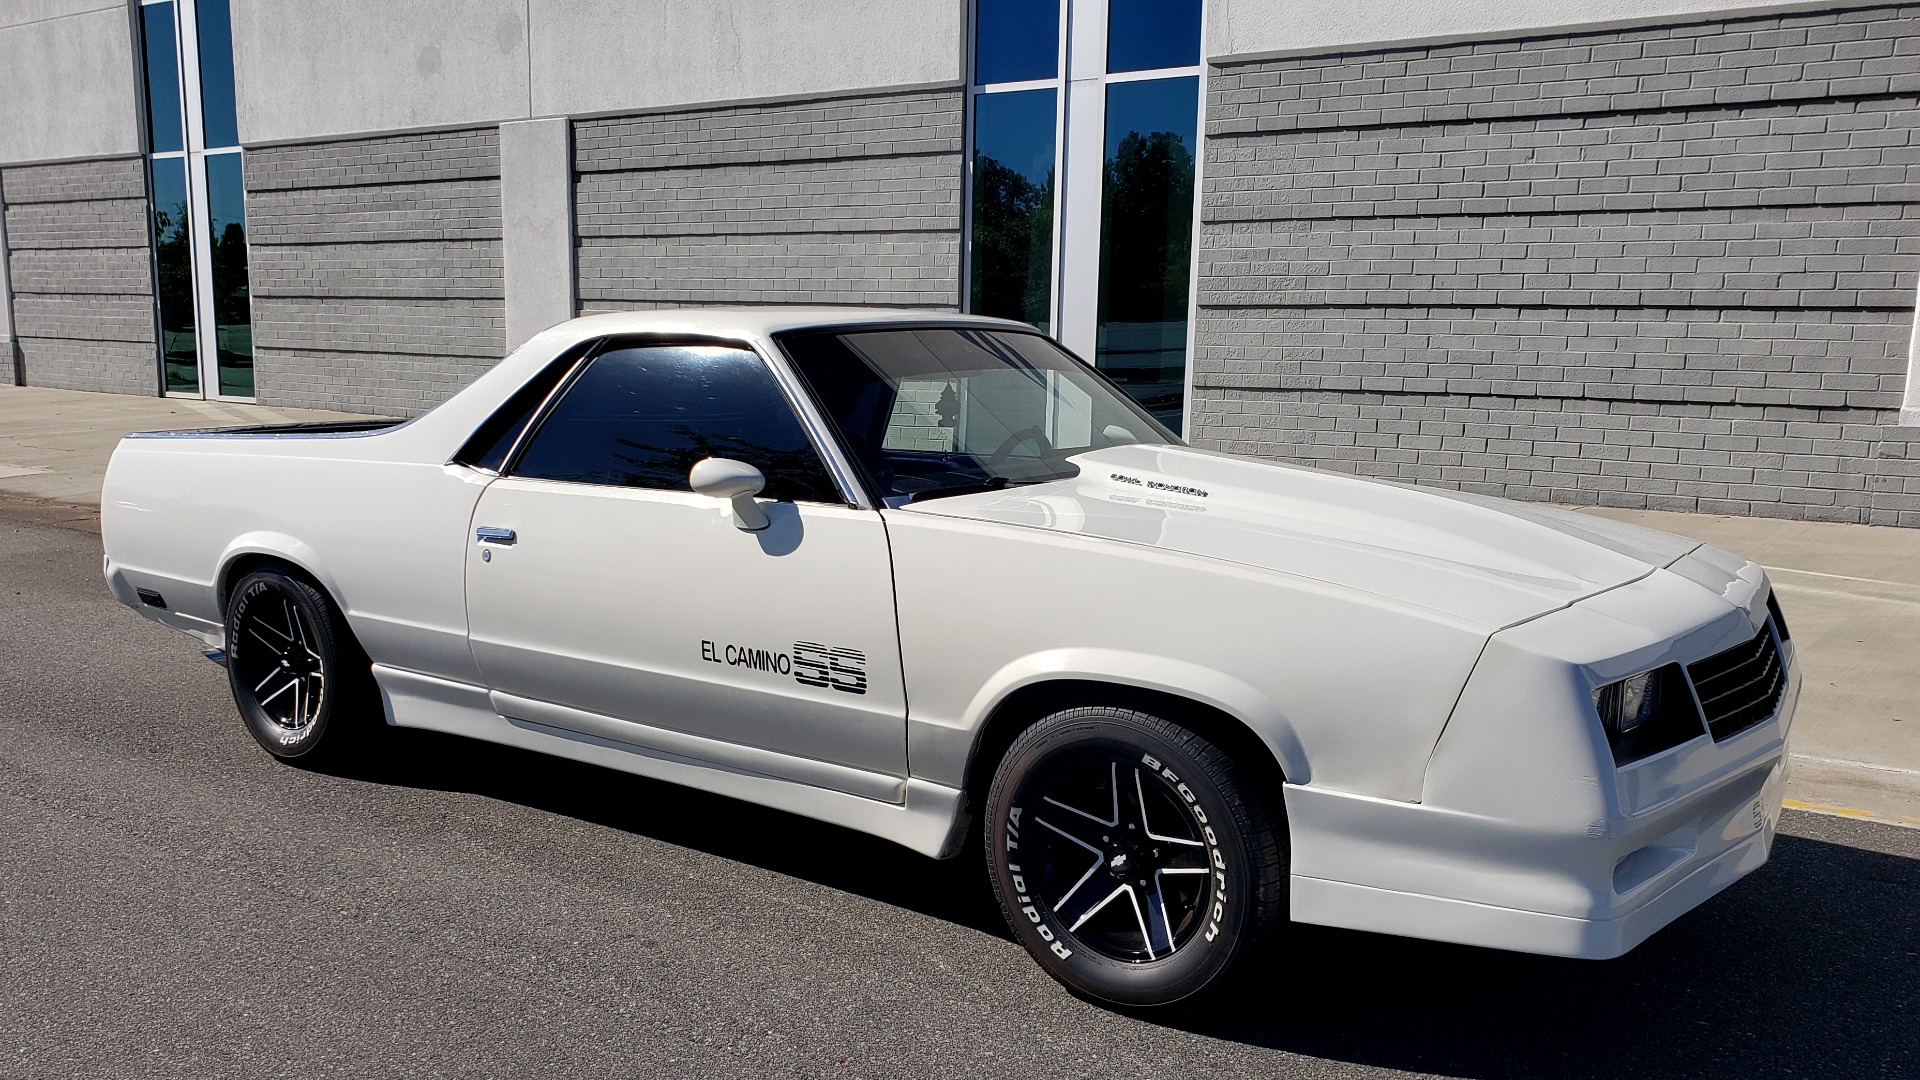 Used 1979 Chevrolet EL CAMINO SS / NEW 350 V8 / AUTO / COWL HOOD / CUSTOM SOUND / FLOWMASTERS for sale Sold at Formula Imports in Charlotte NC 28227 16